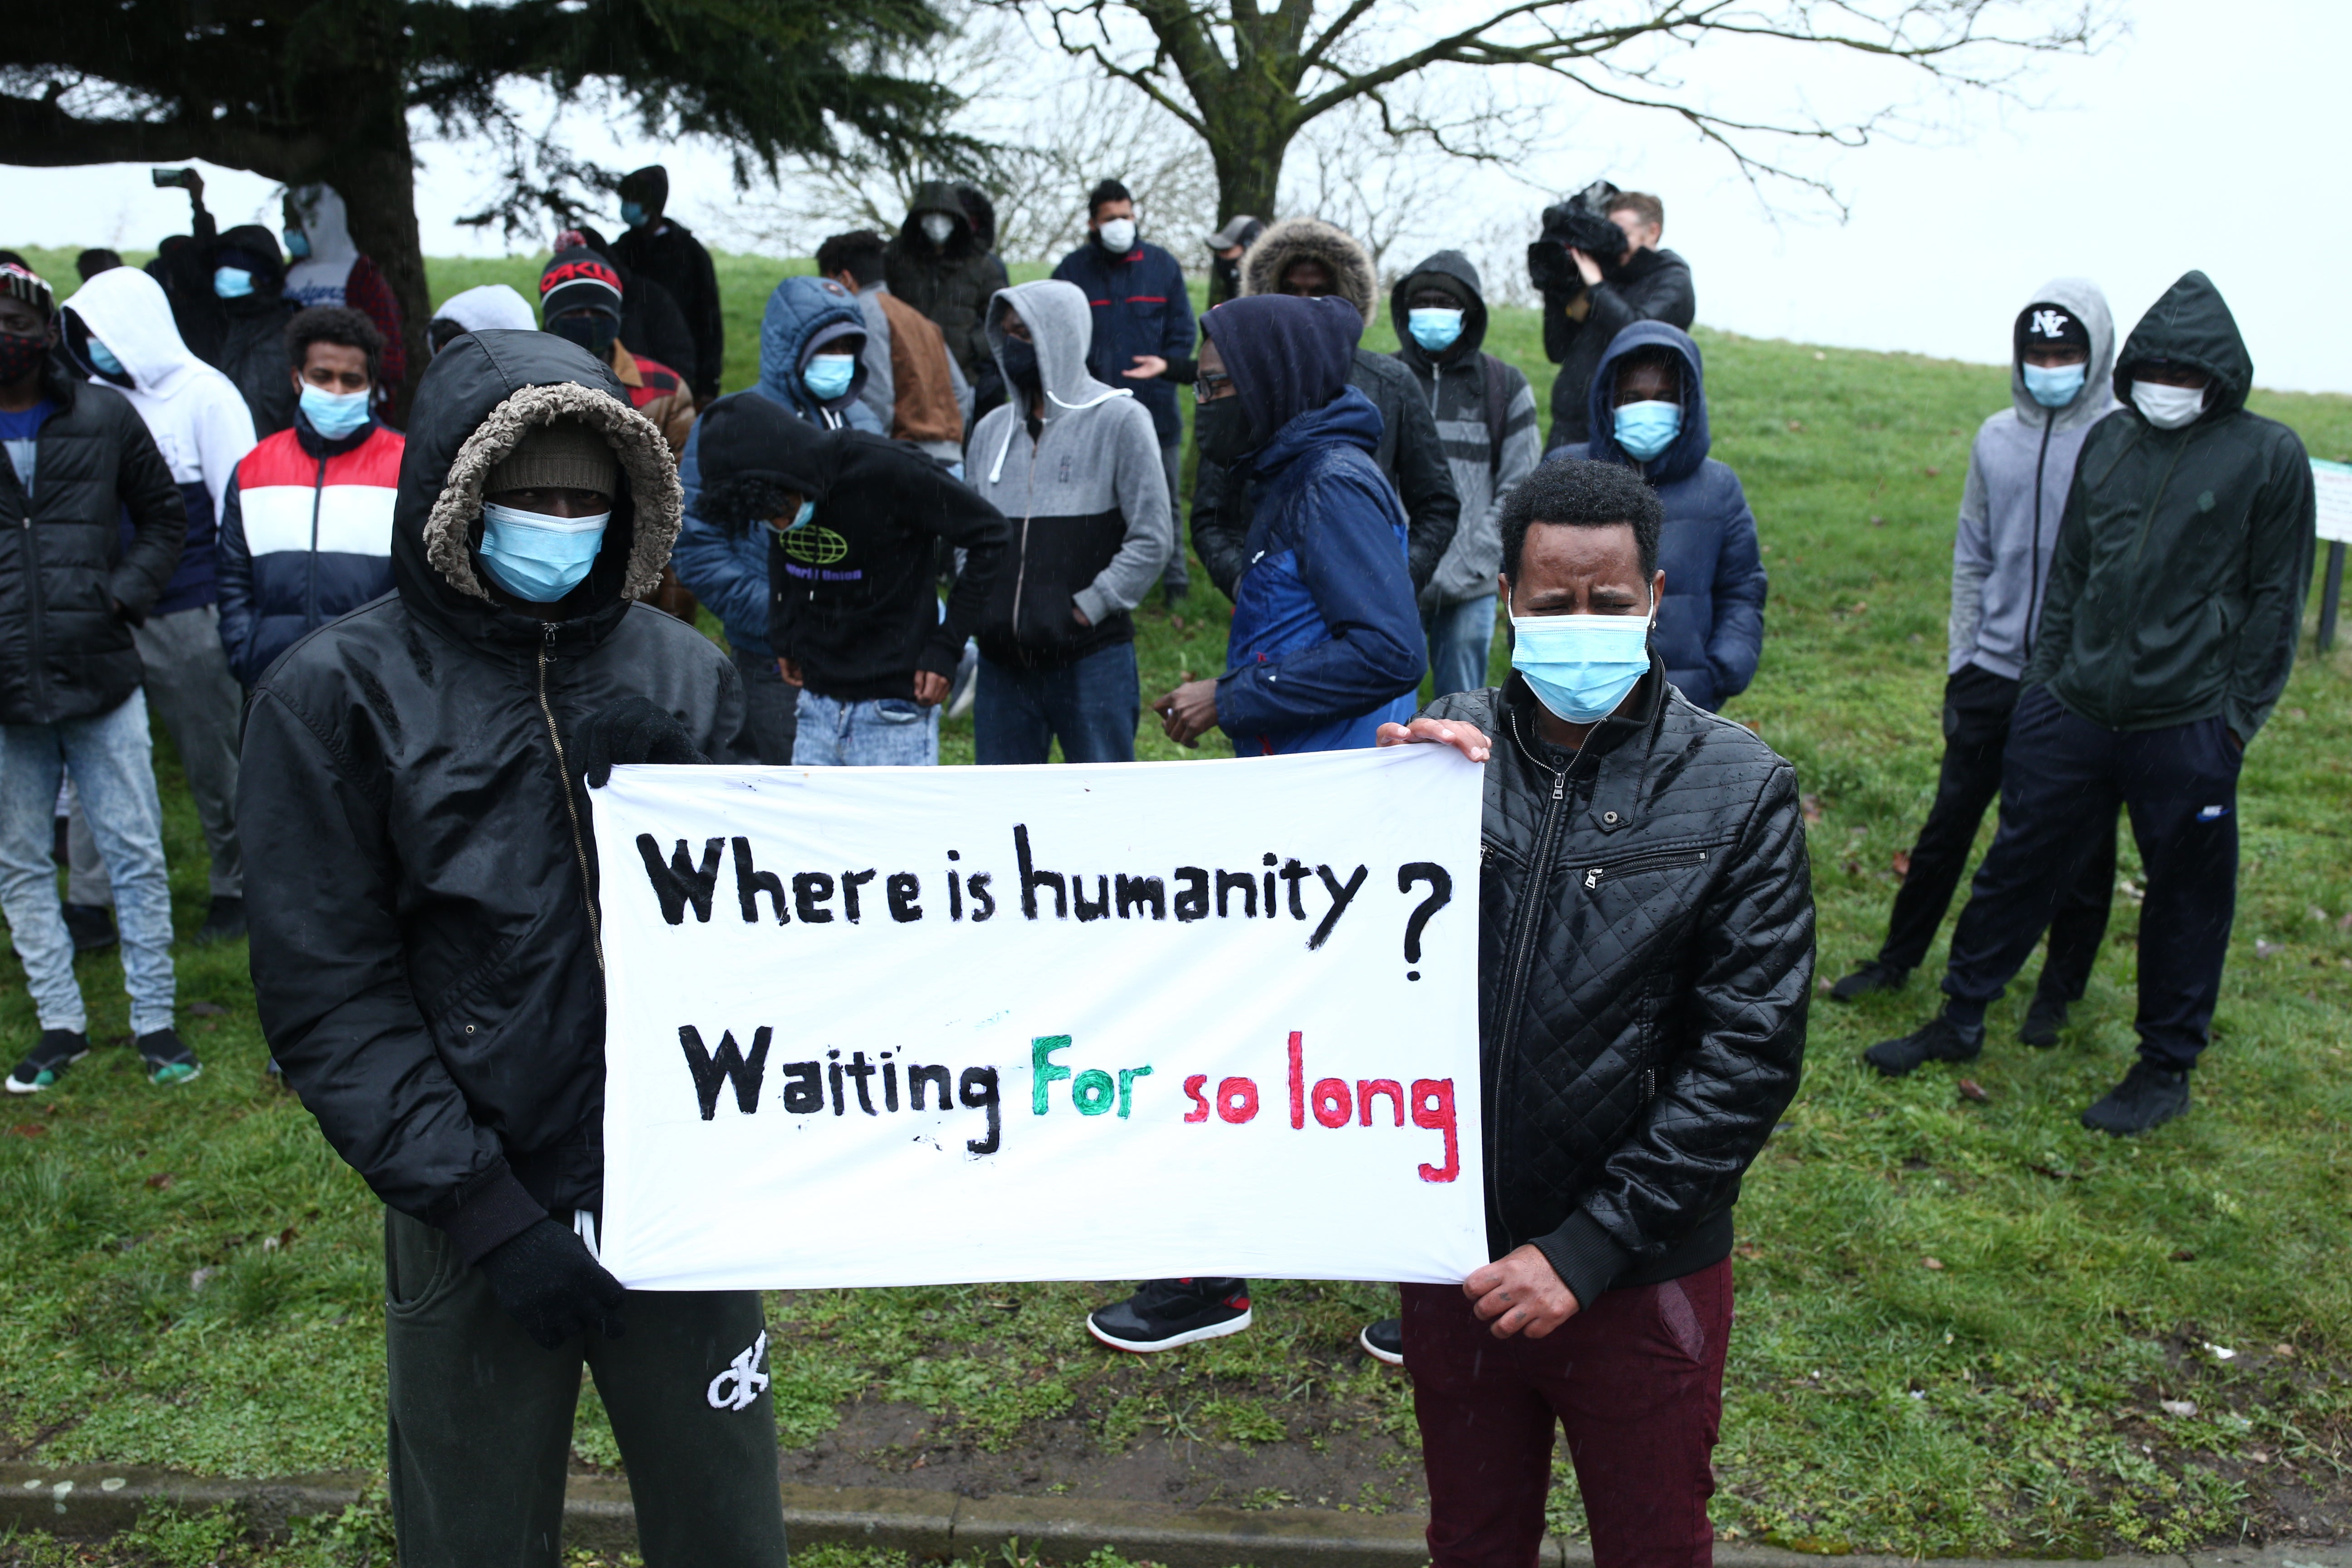 Protesters outside the Crowne Plaza London Heathrow hotel in West Drayton, London last year